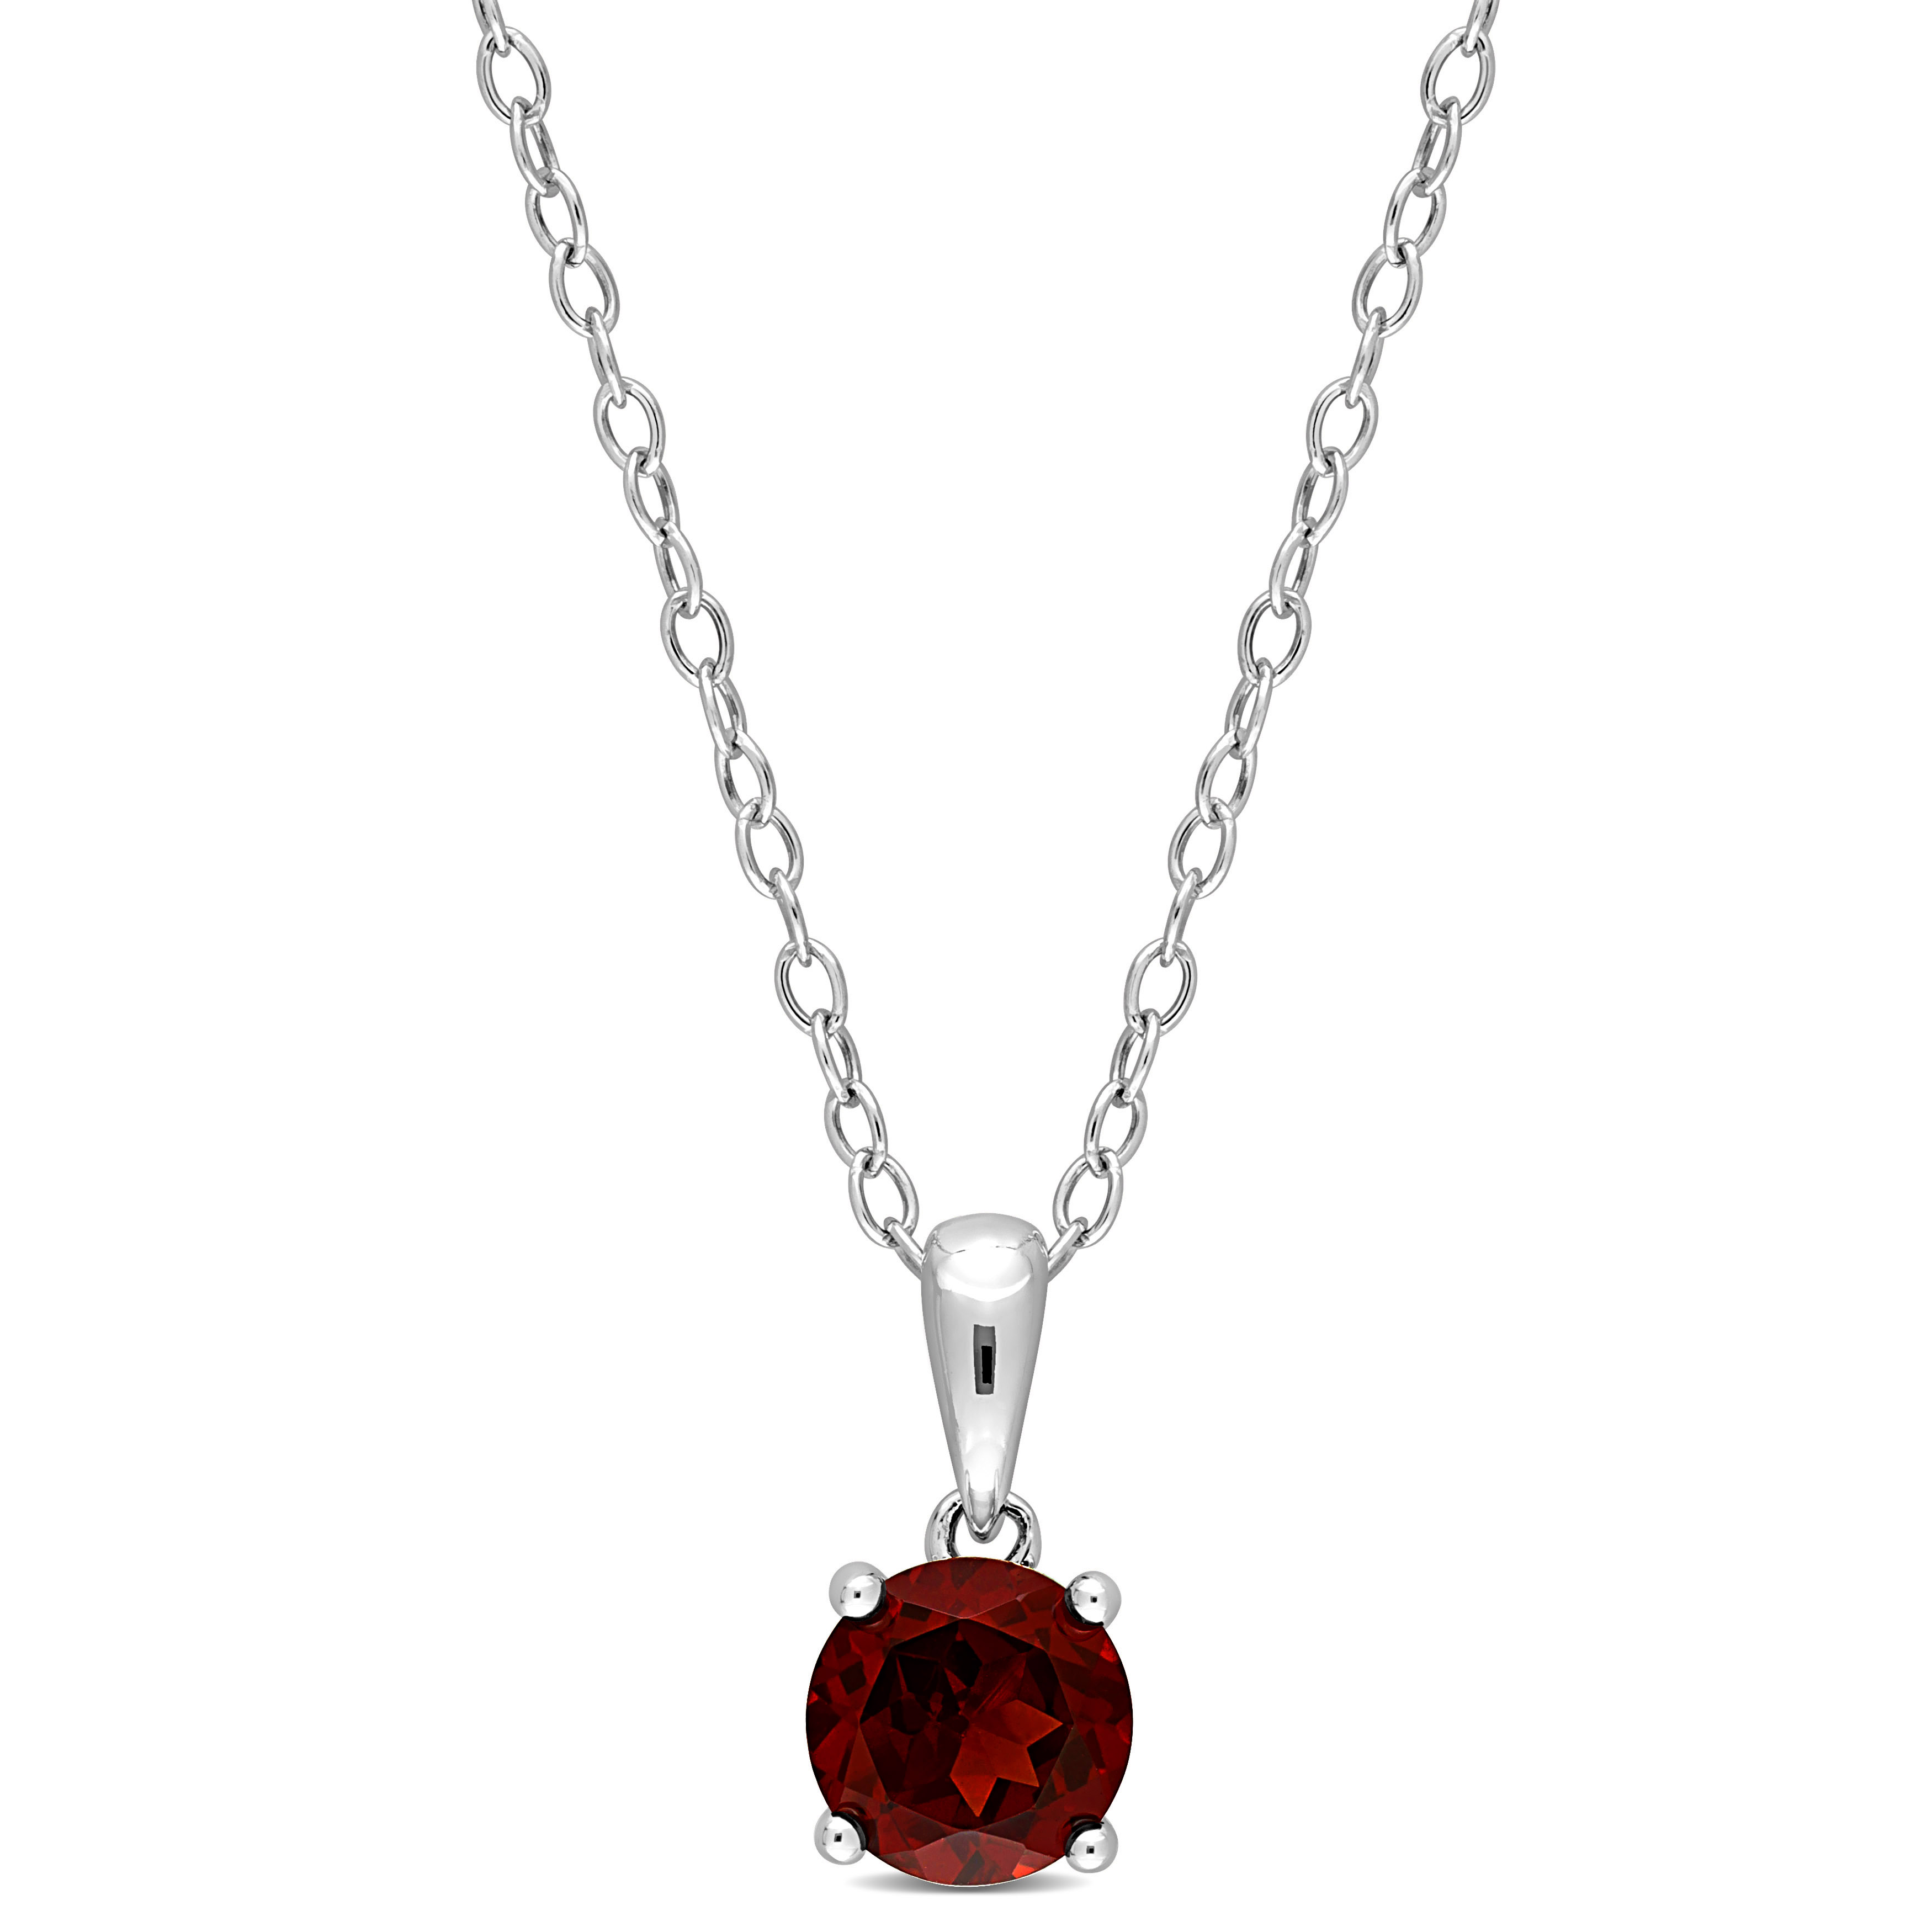 1 CT TGW Garnet Solitaire Heart Design Pendant with Chain in Sterling Silver - 18 in.